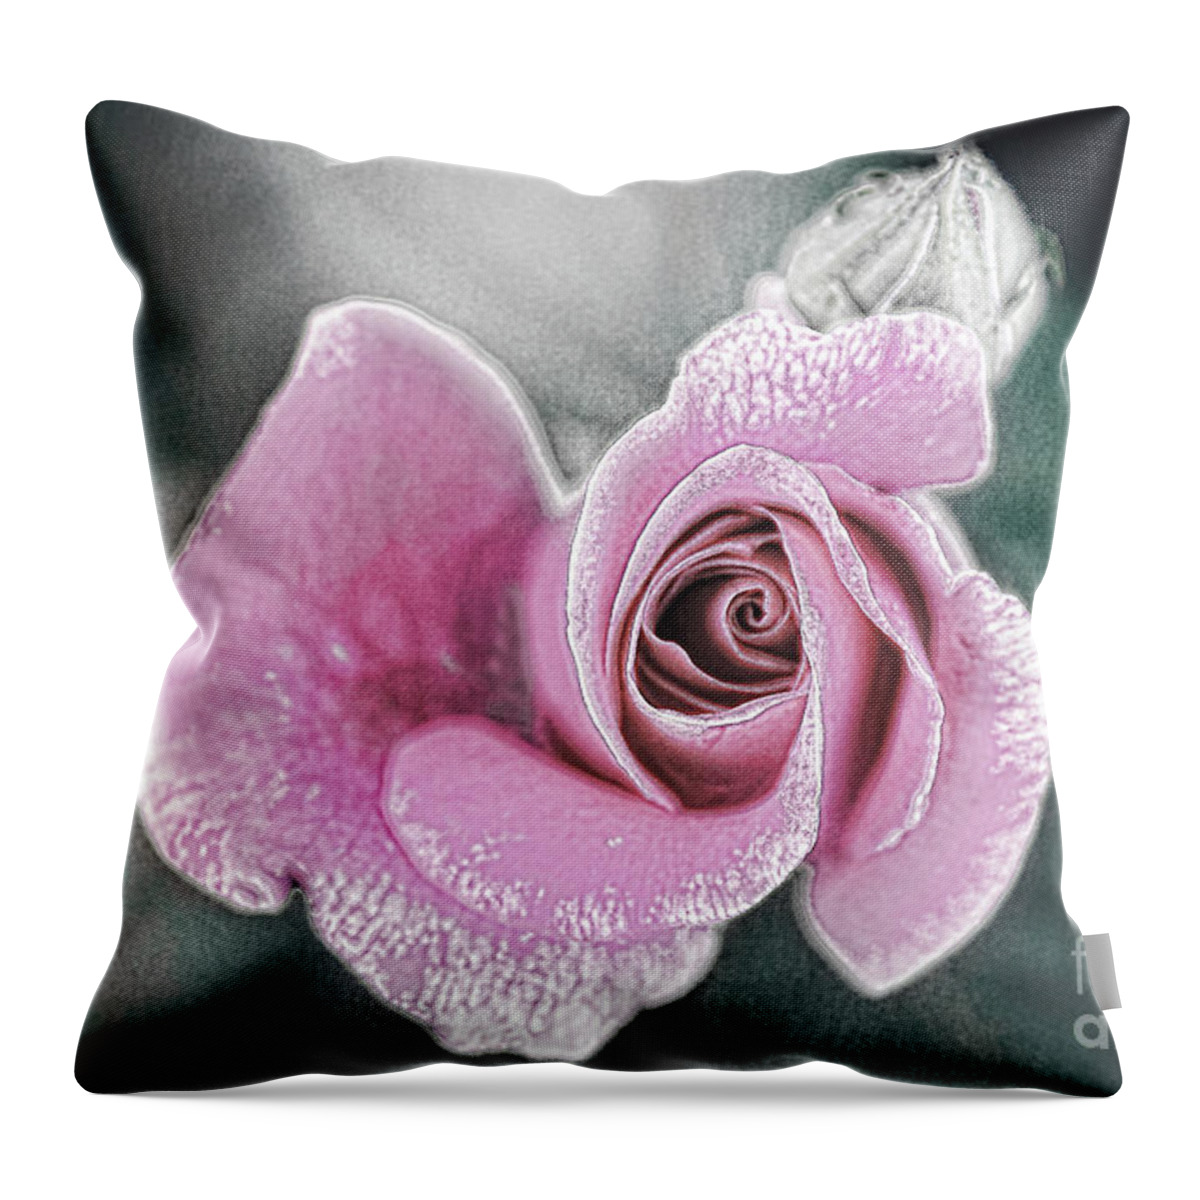 Rose Throw Pillow featuring the digital art Faded Romance by Sharon McConnell